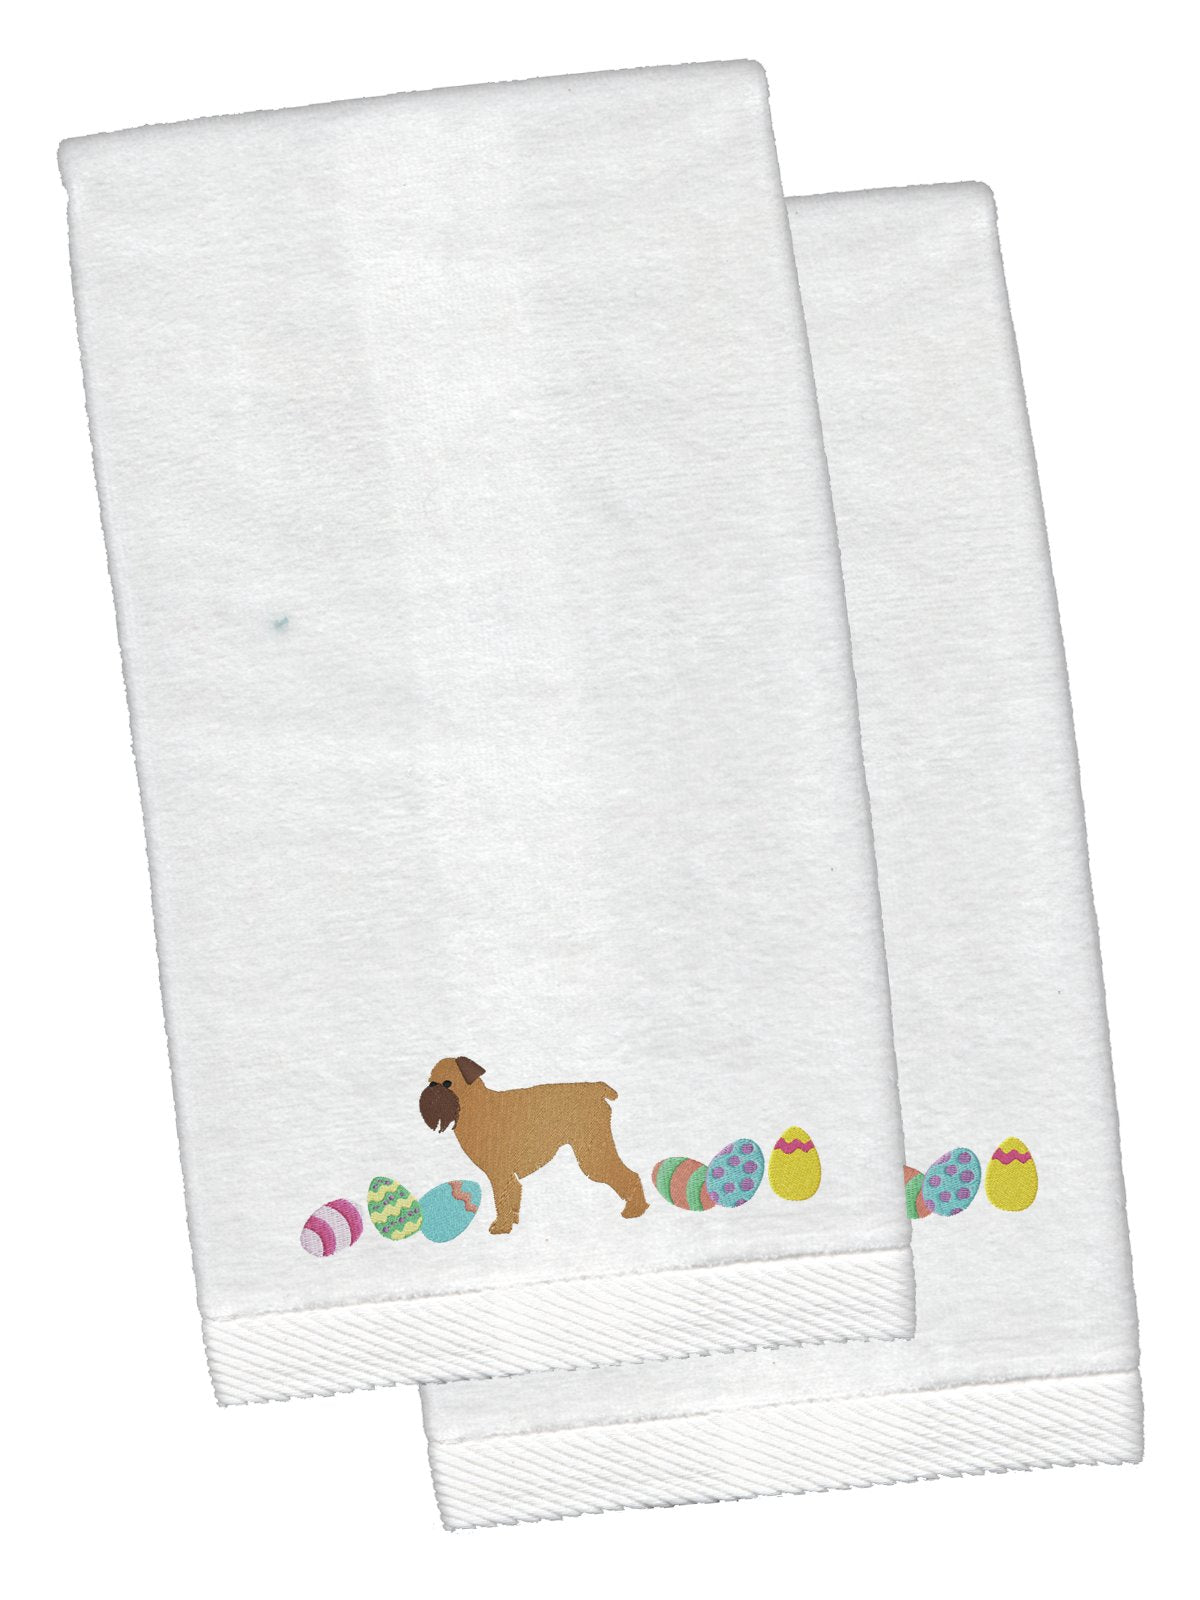 Brussels Griffon Easter White Embroidered Plush Hand Towel Set of 2 CK1617KTEMB by Caroline's Treasures